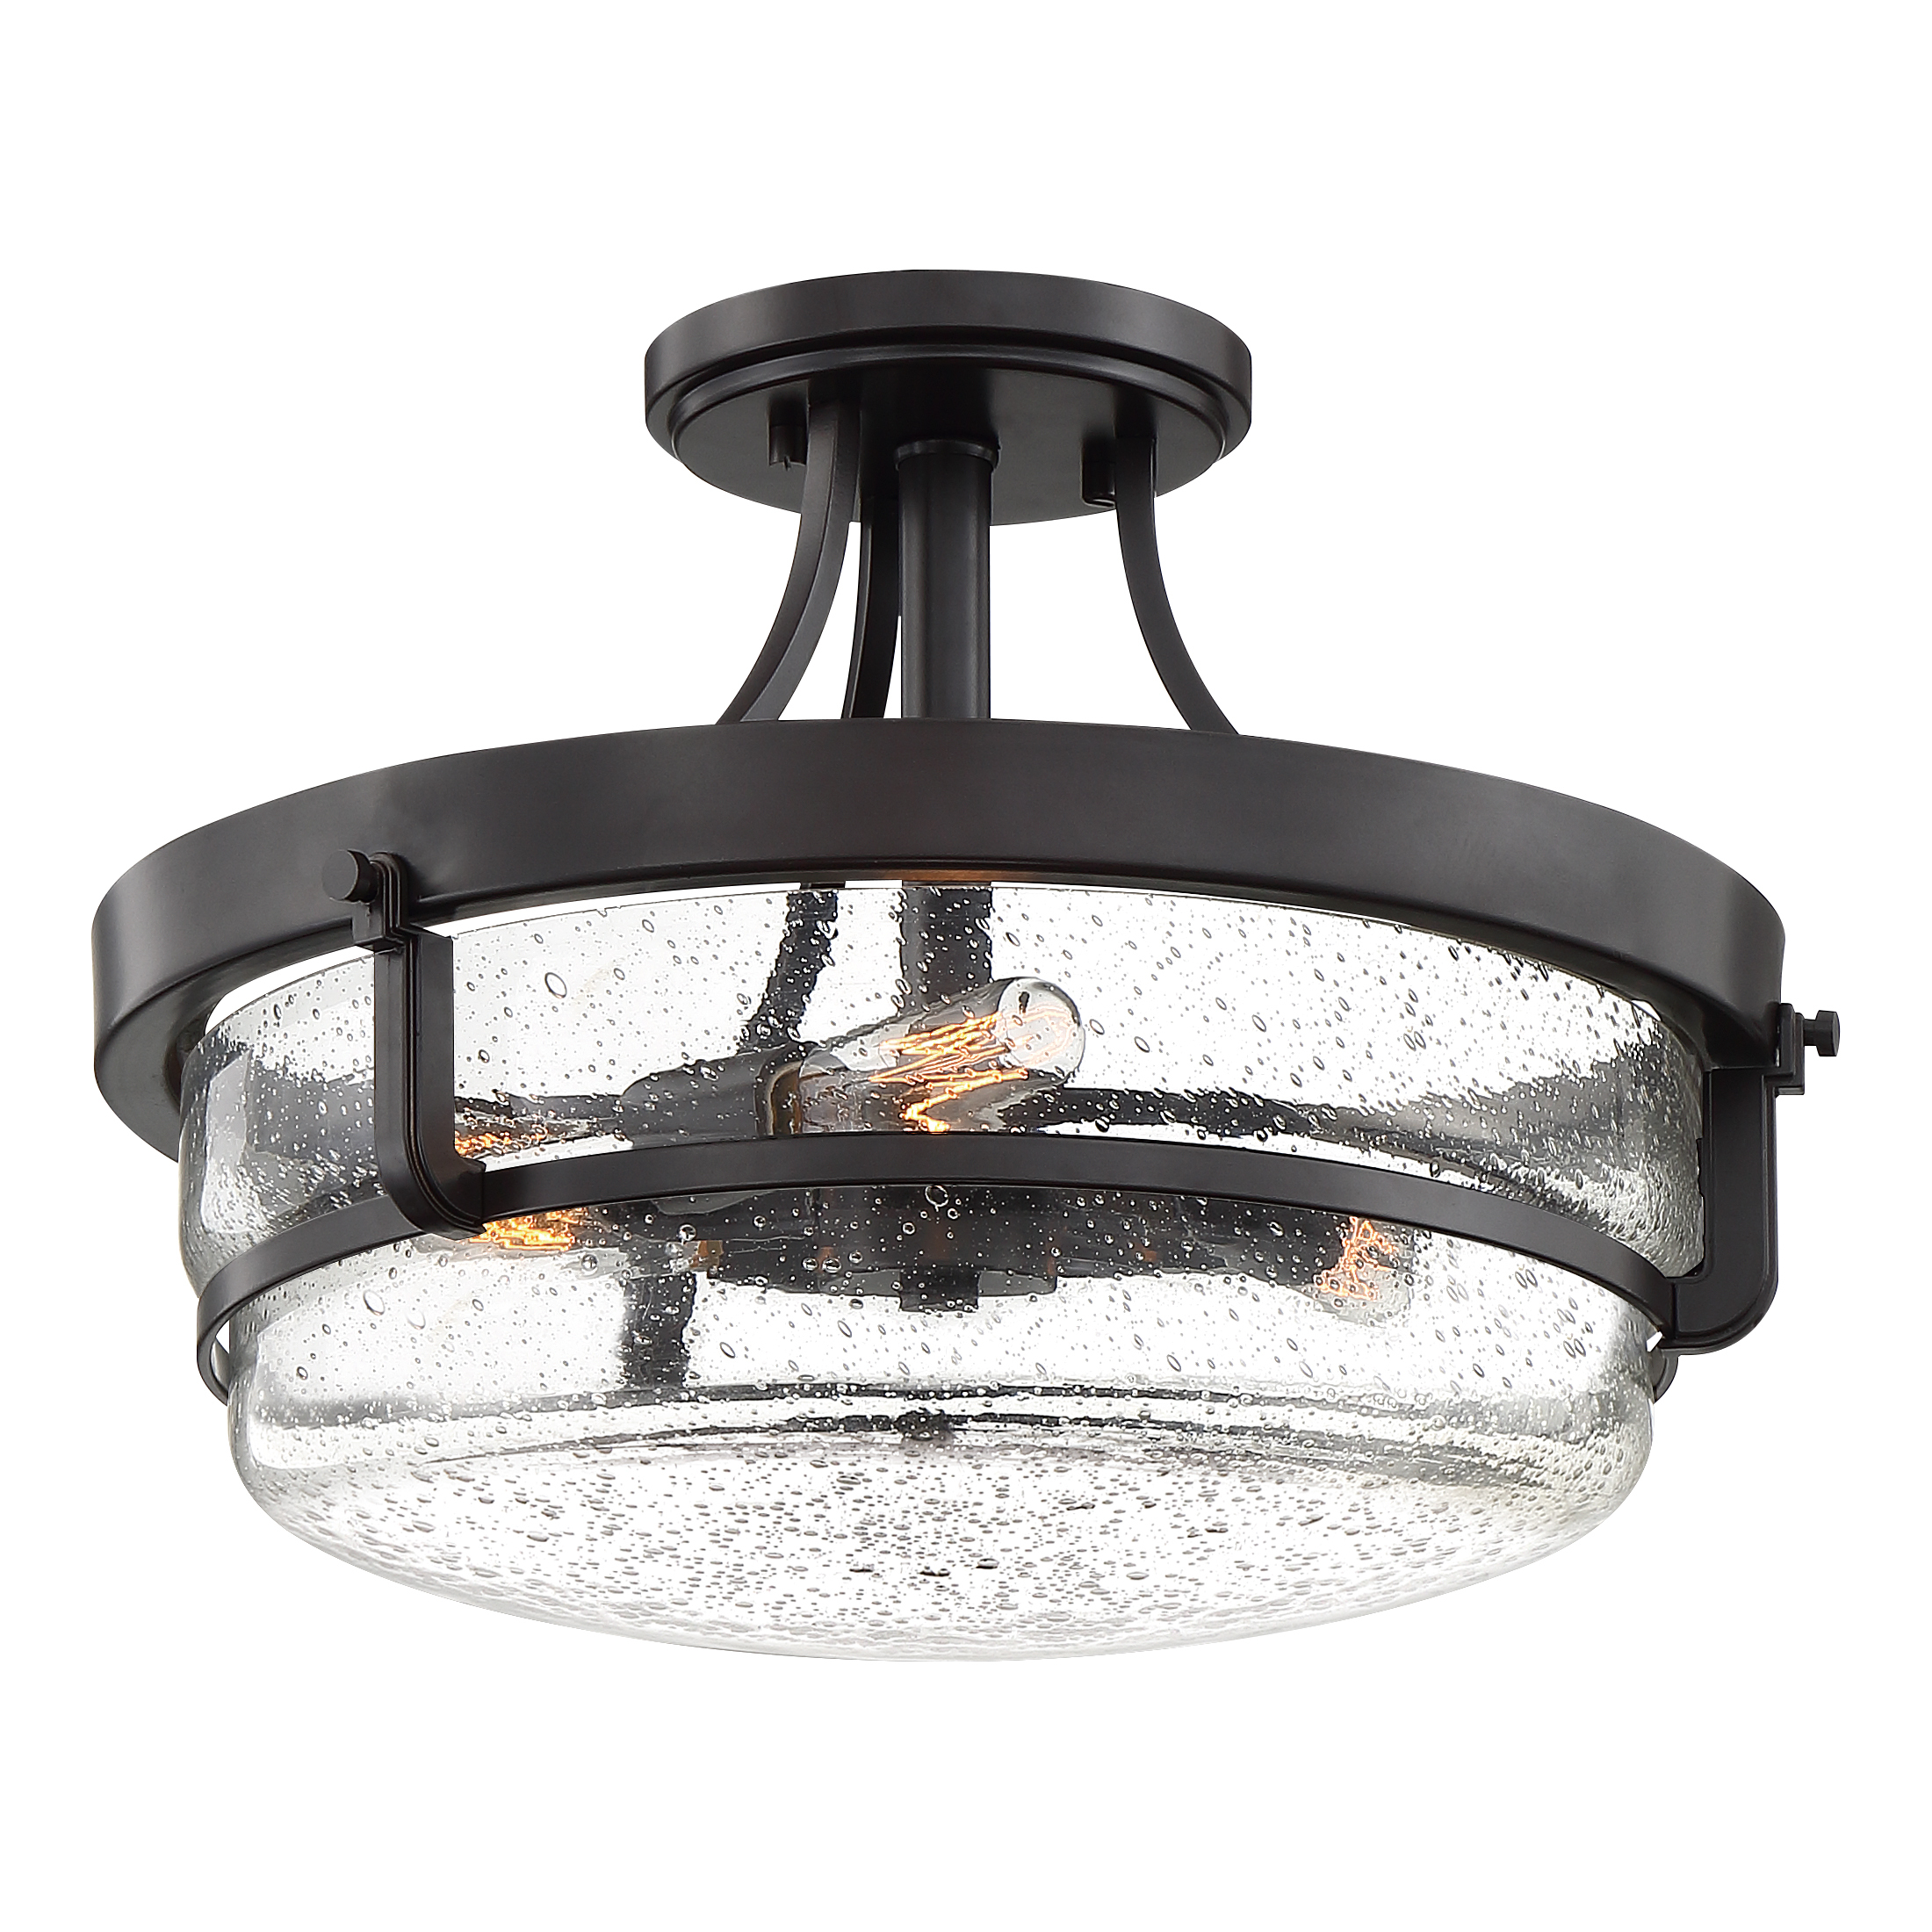 Outpost Semi Flush Ceiling Light By Quoizel Qf3515pn